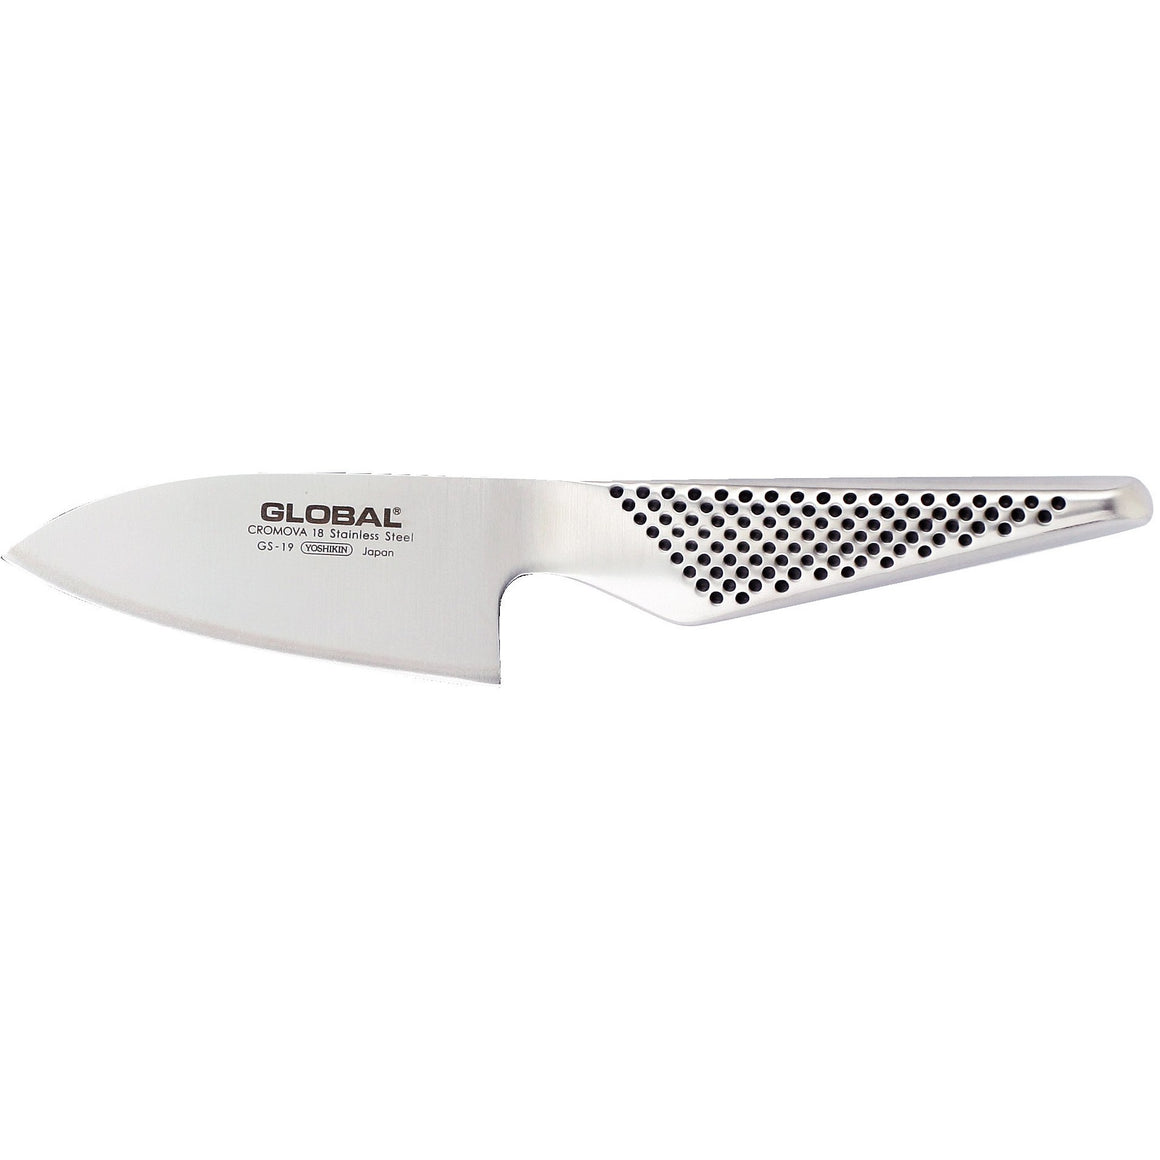 Global GS Series Small Fish/ Poultry Knife